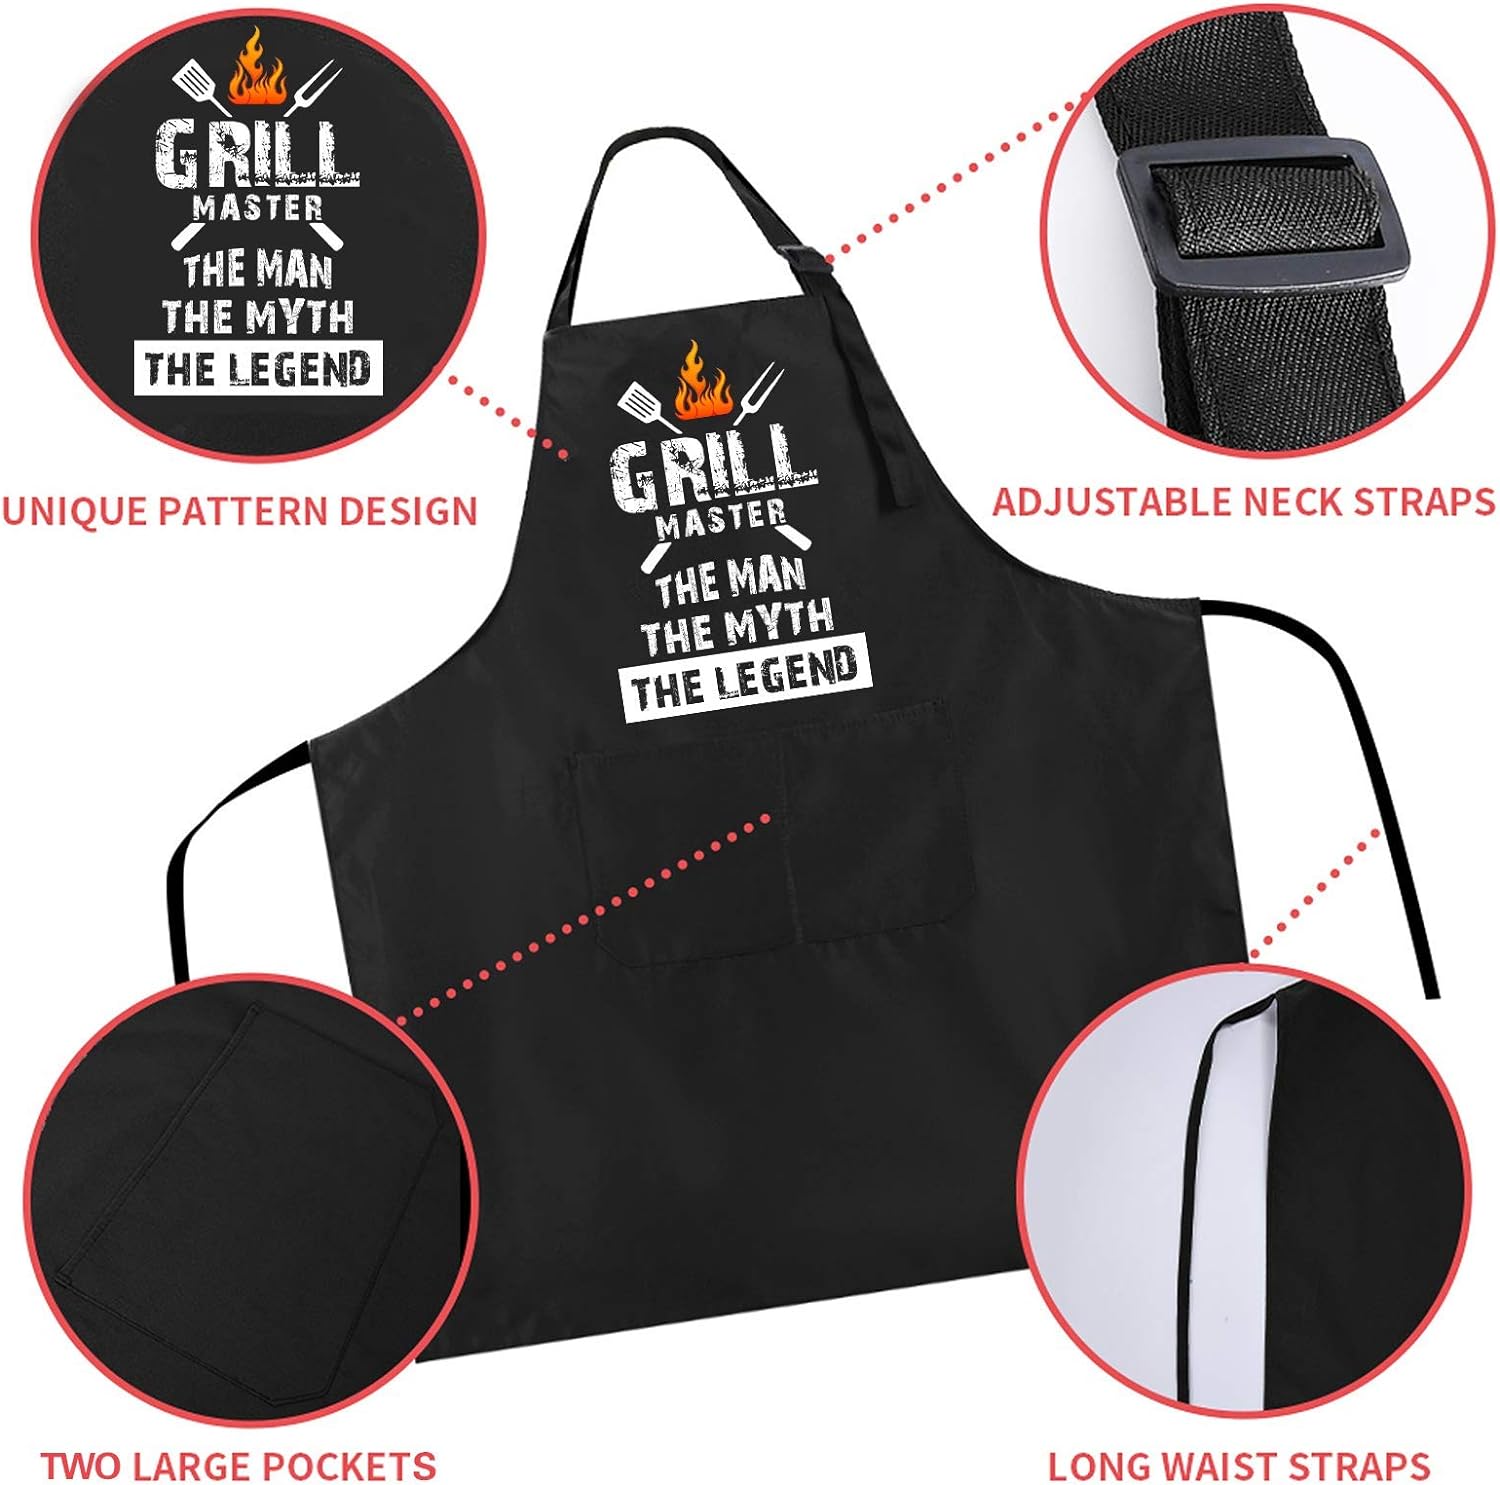 Rosoz Funny BBQ Black Chef Aprons for Men, Grill Master, Adjustable Kitchen Cooking Aprons with Pocket Waterproof Oil Proof Father s Day/Birthday - image 3 of 7